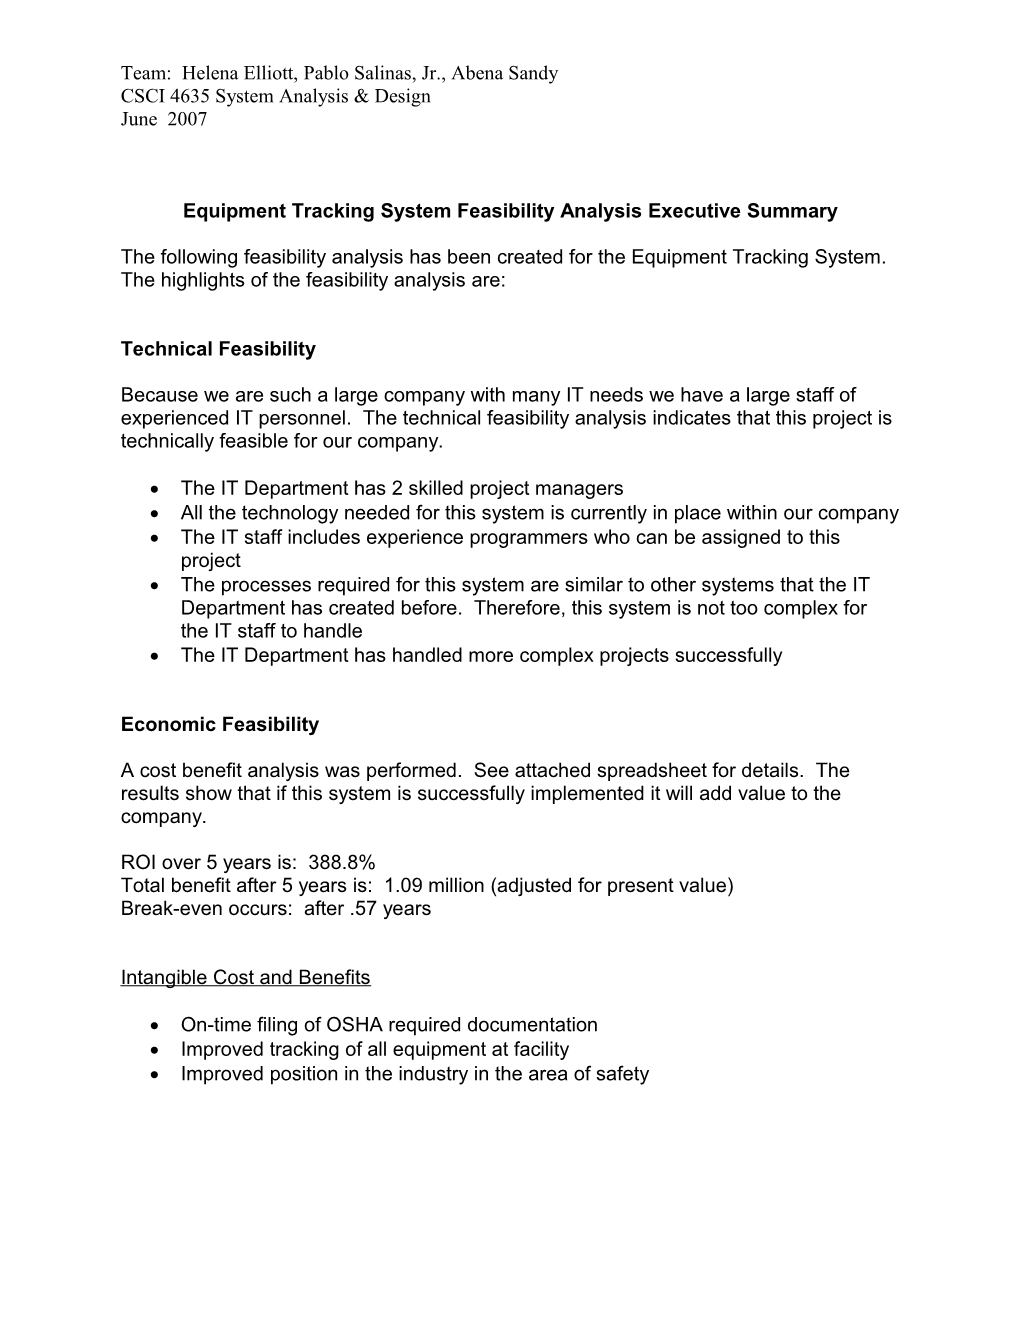 Equipment Tracking System Feasibility Analysis Executive Summary